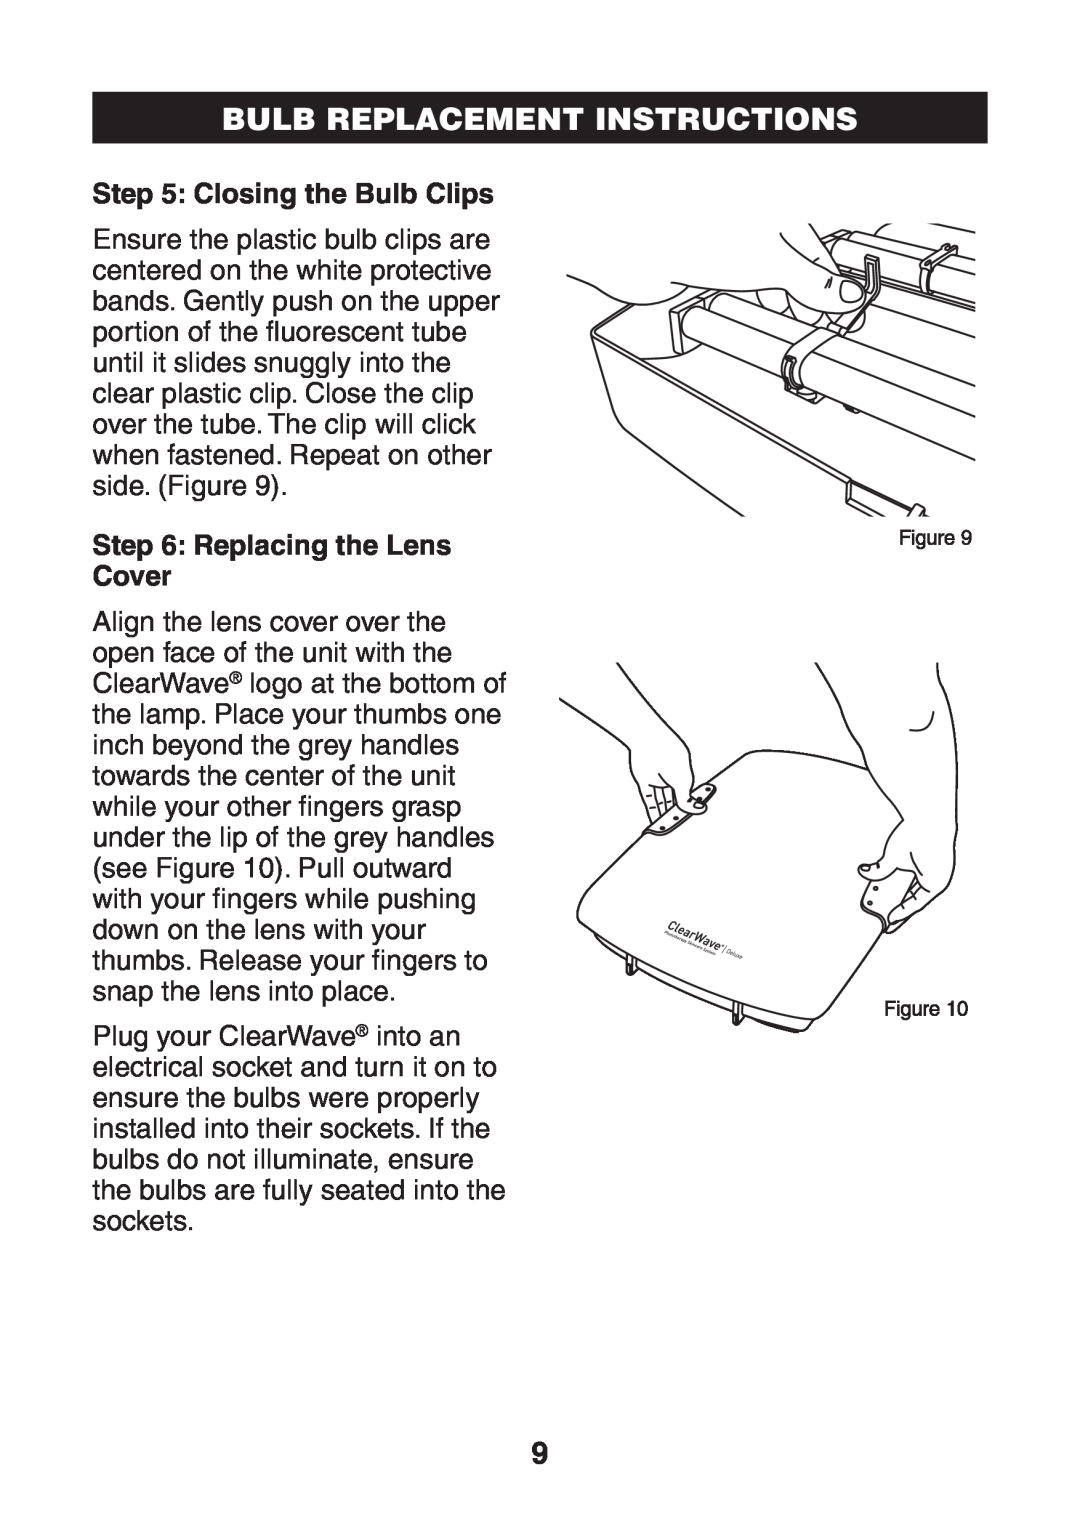 Verilux CWST1 manual Closing the Bulb Clips, Replacing the Lens Cover, Bulb Replacement Instructions 